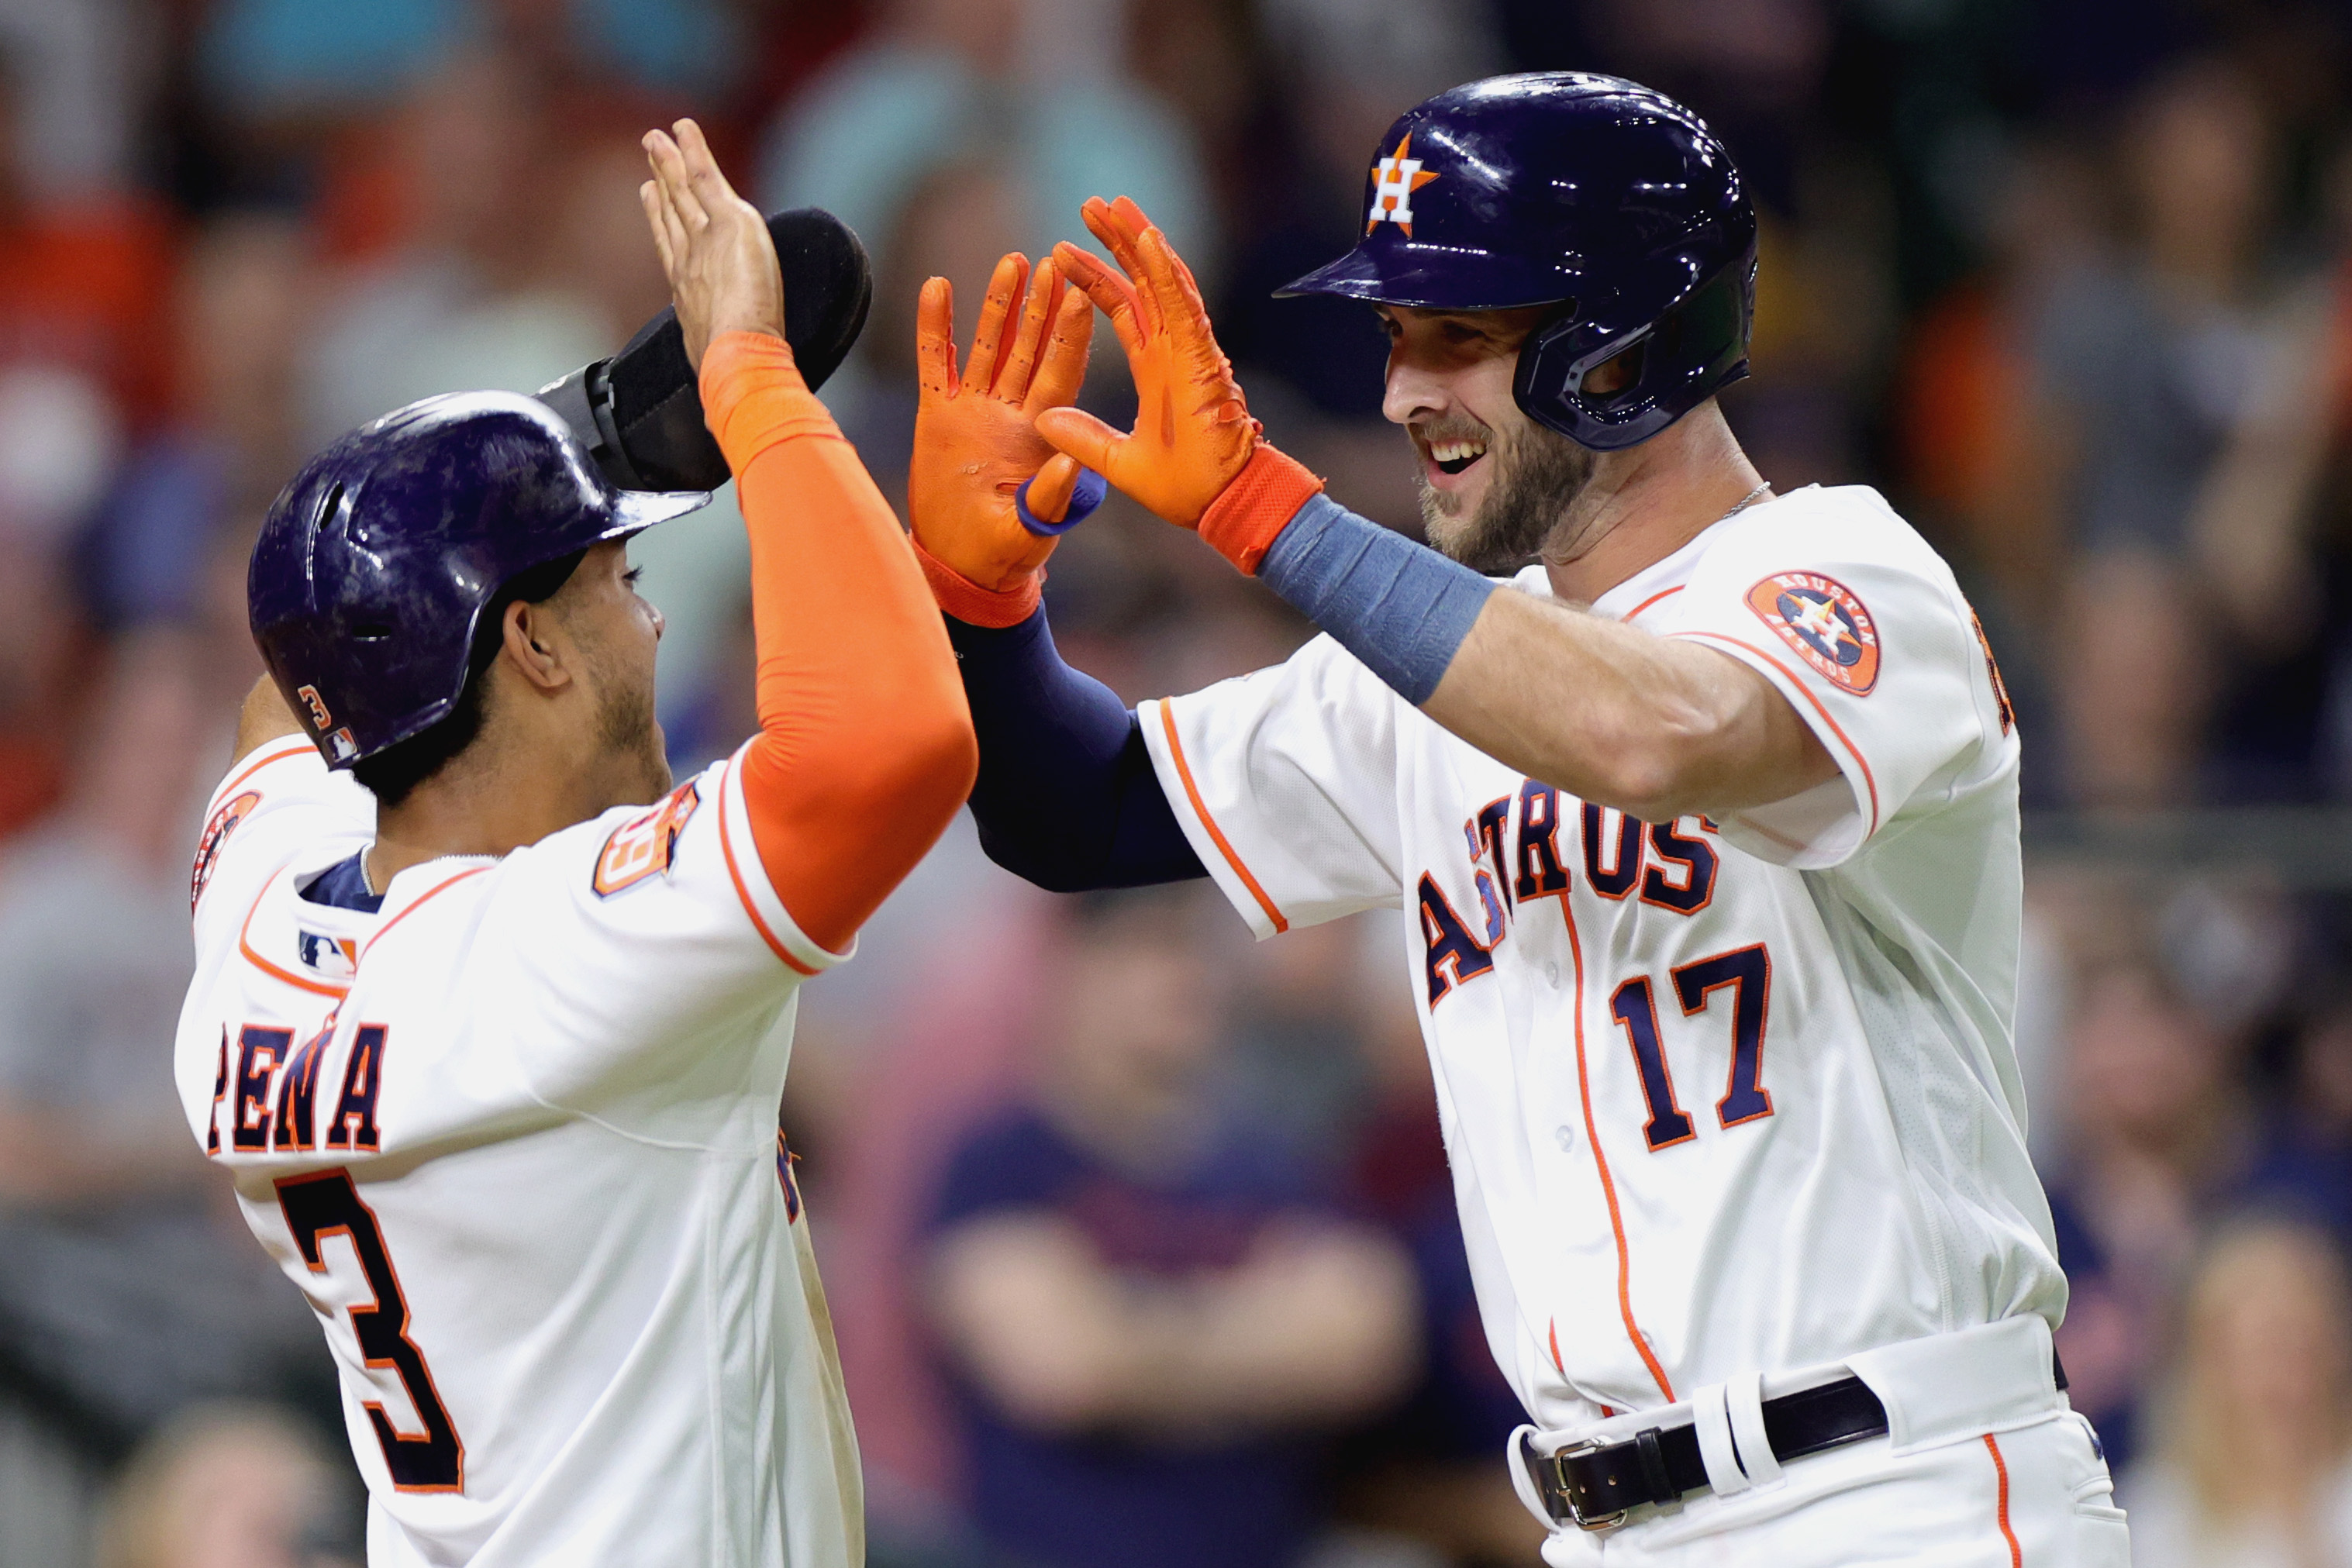 Four Houston Astros Prospects Make Massive Move Up Latest Top-30